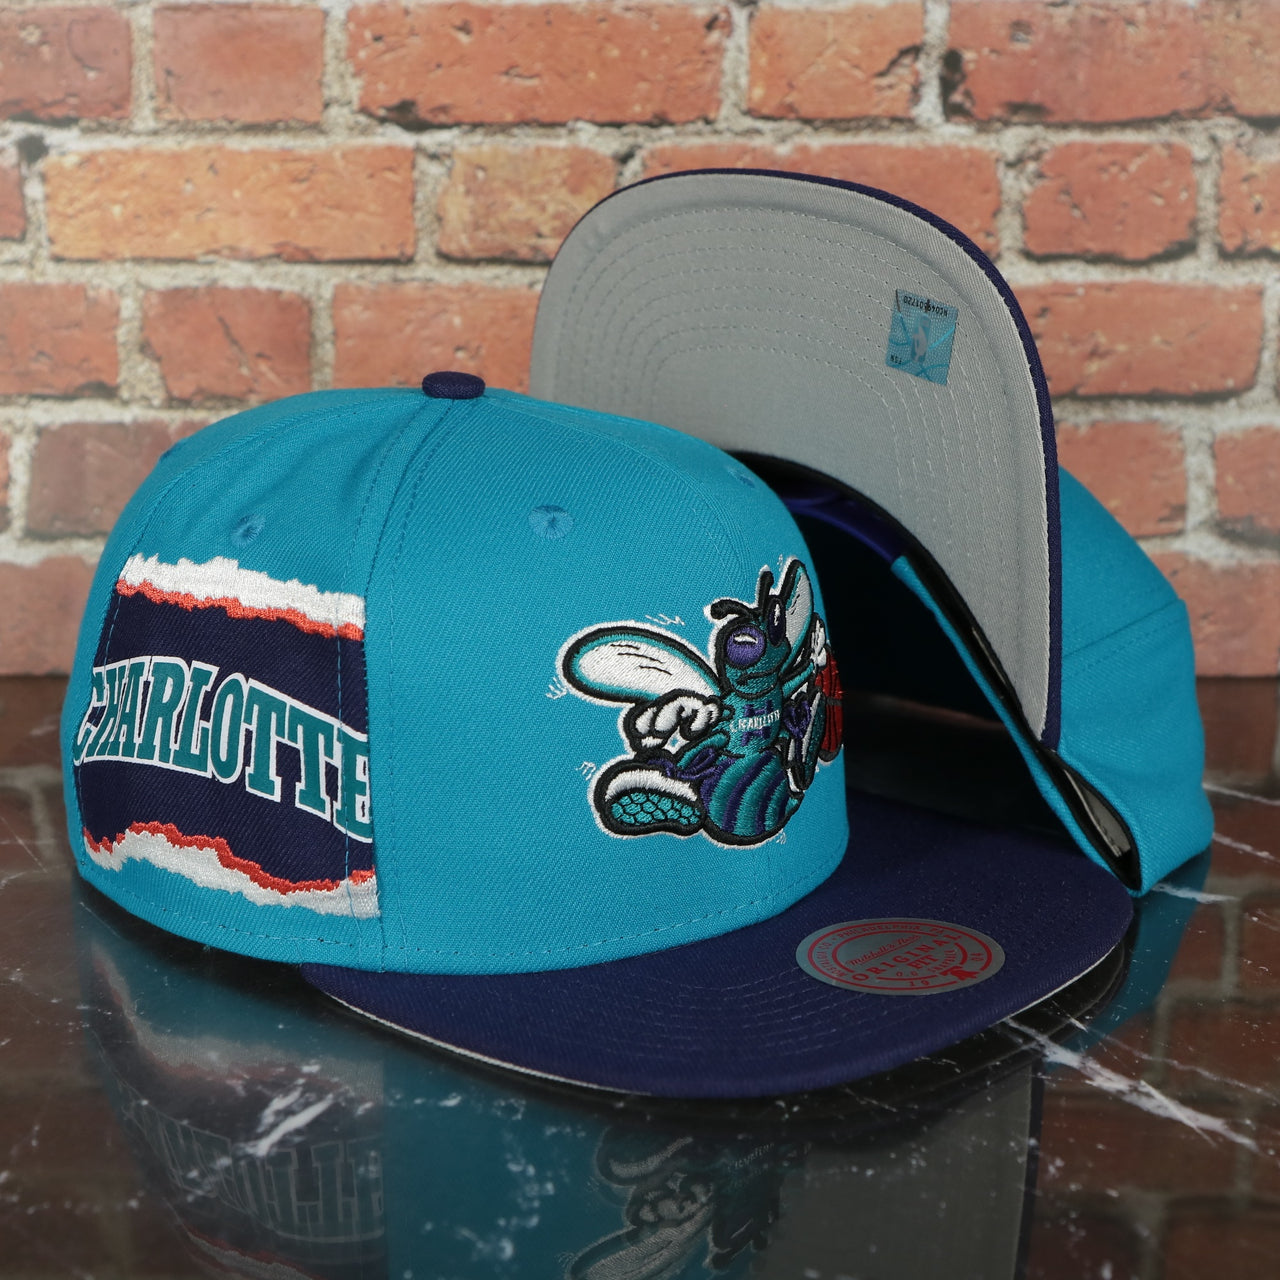 Charlotte Hornets Hardwood Classics Jumbotron "Charlotte" Ripped Wordmark side patch Grey Bottom Teal/Purple Snapback hat | Mitchell and Ness Two Tone Snap Cap